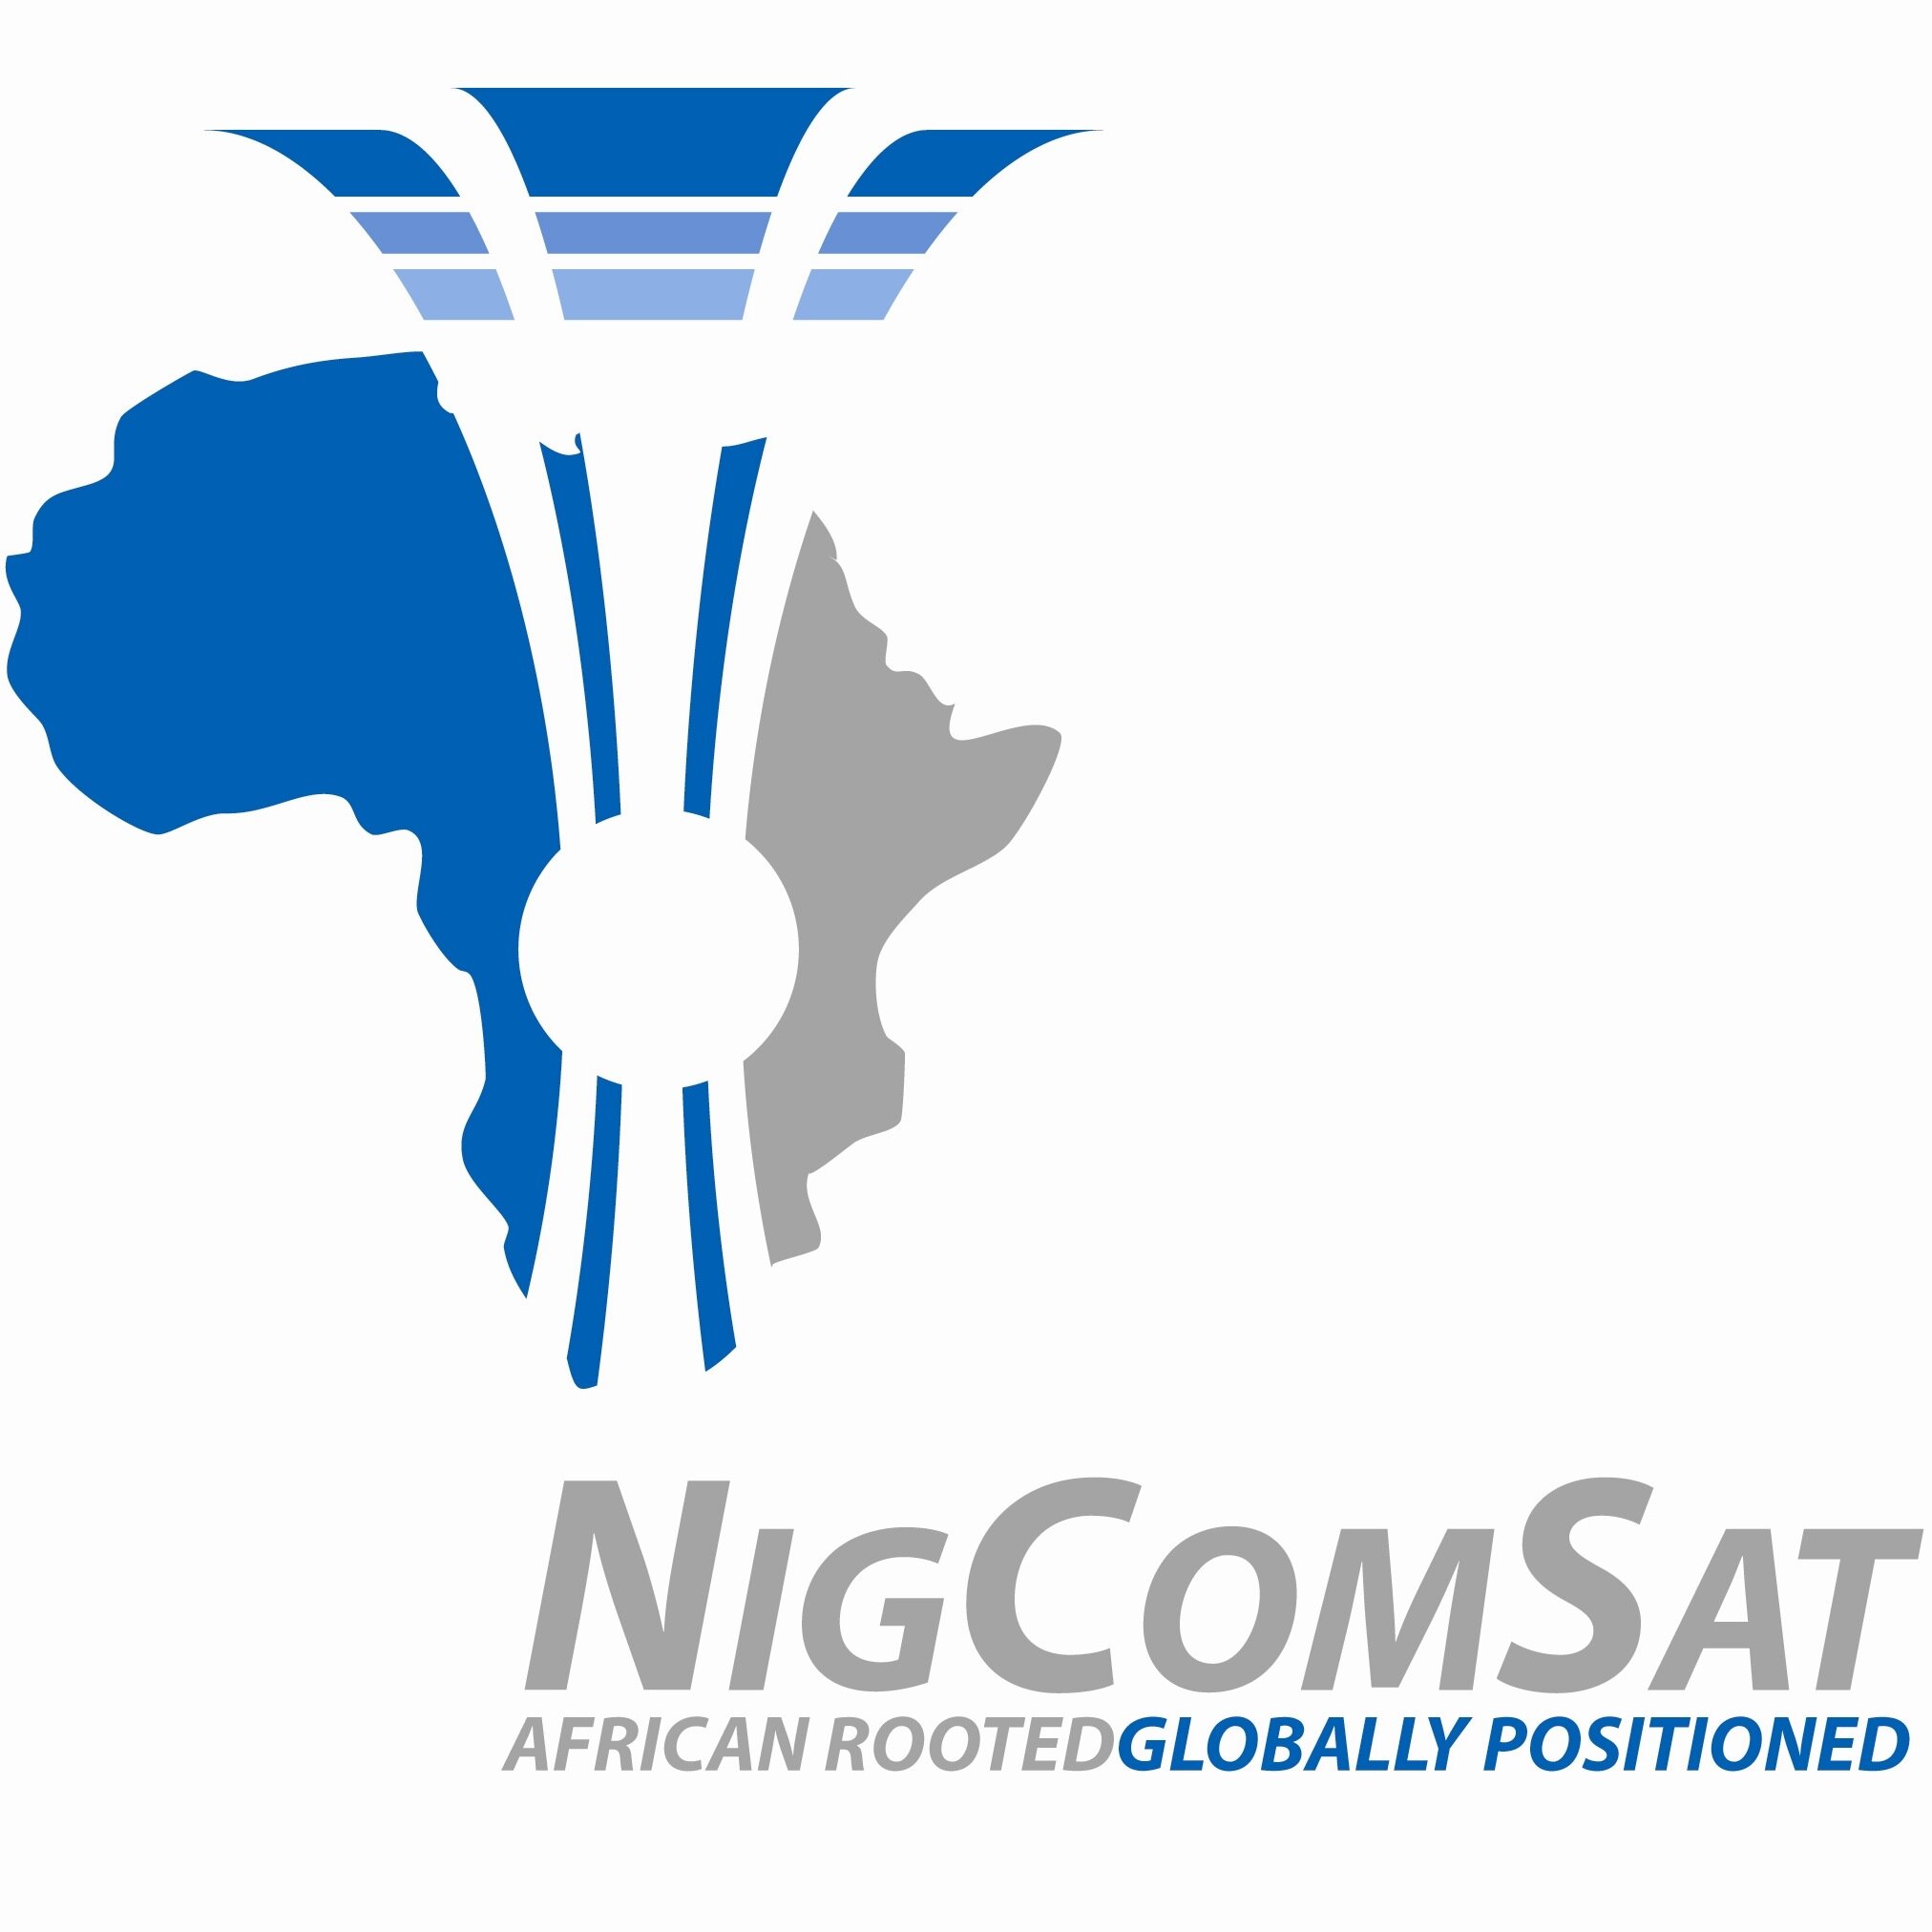 NIGCOMSAT Ltd owns & operates the Nigerian Communications Satellite systems. Our vision is to be the leading satellite comms solutions provider in Nig. & Africa